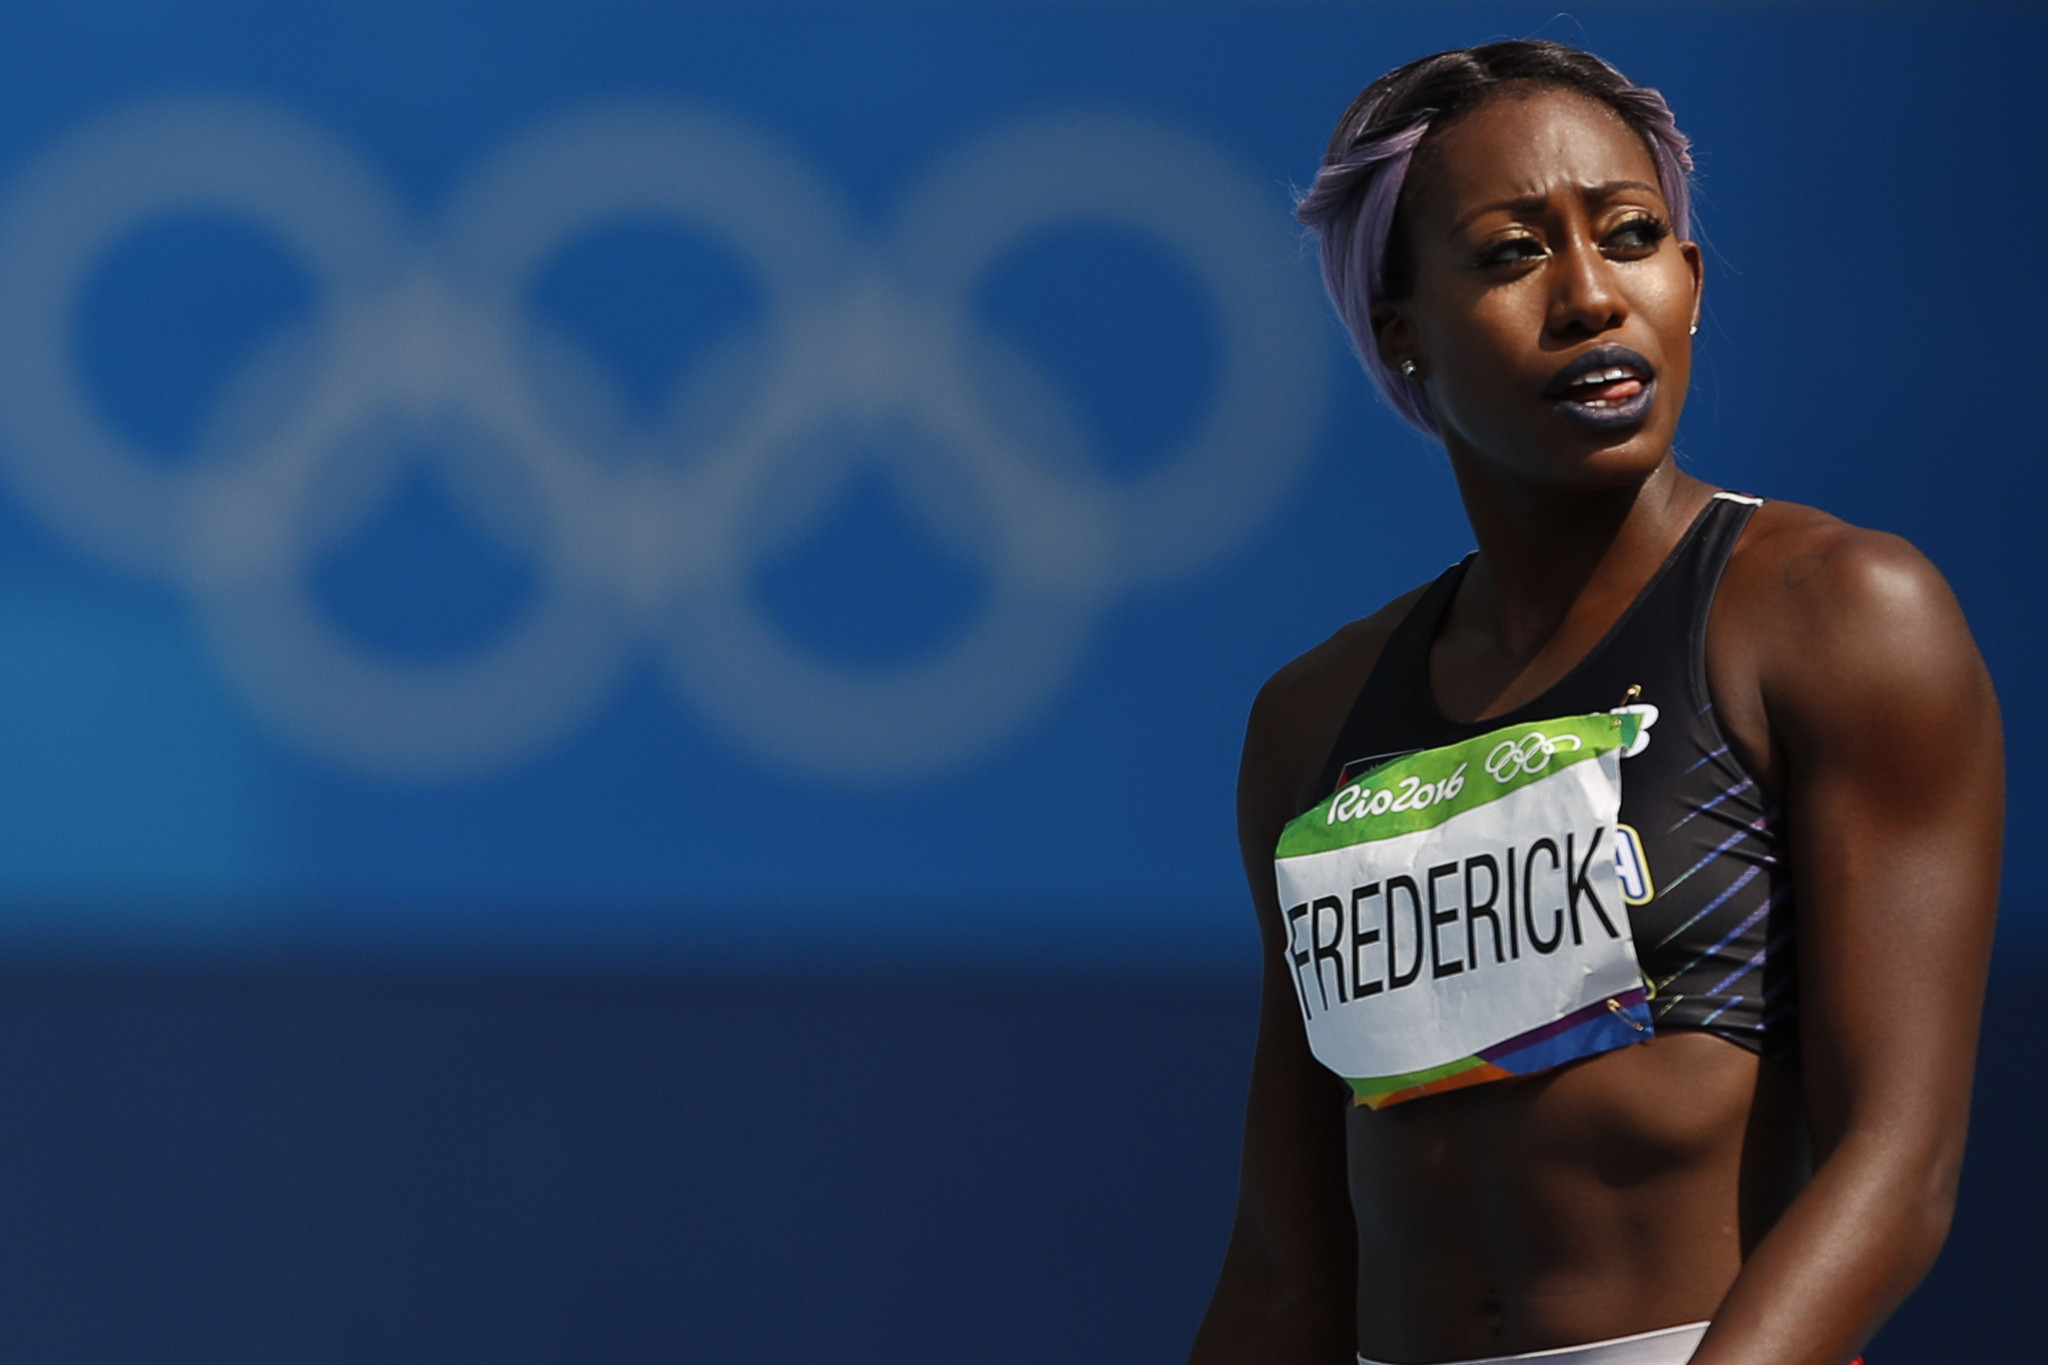 Priscilla Frederick-Loomis is planning to compete in monobob with an eye on representing Antigua at Beijing 2022 ©Getty Images